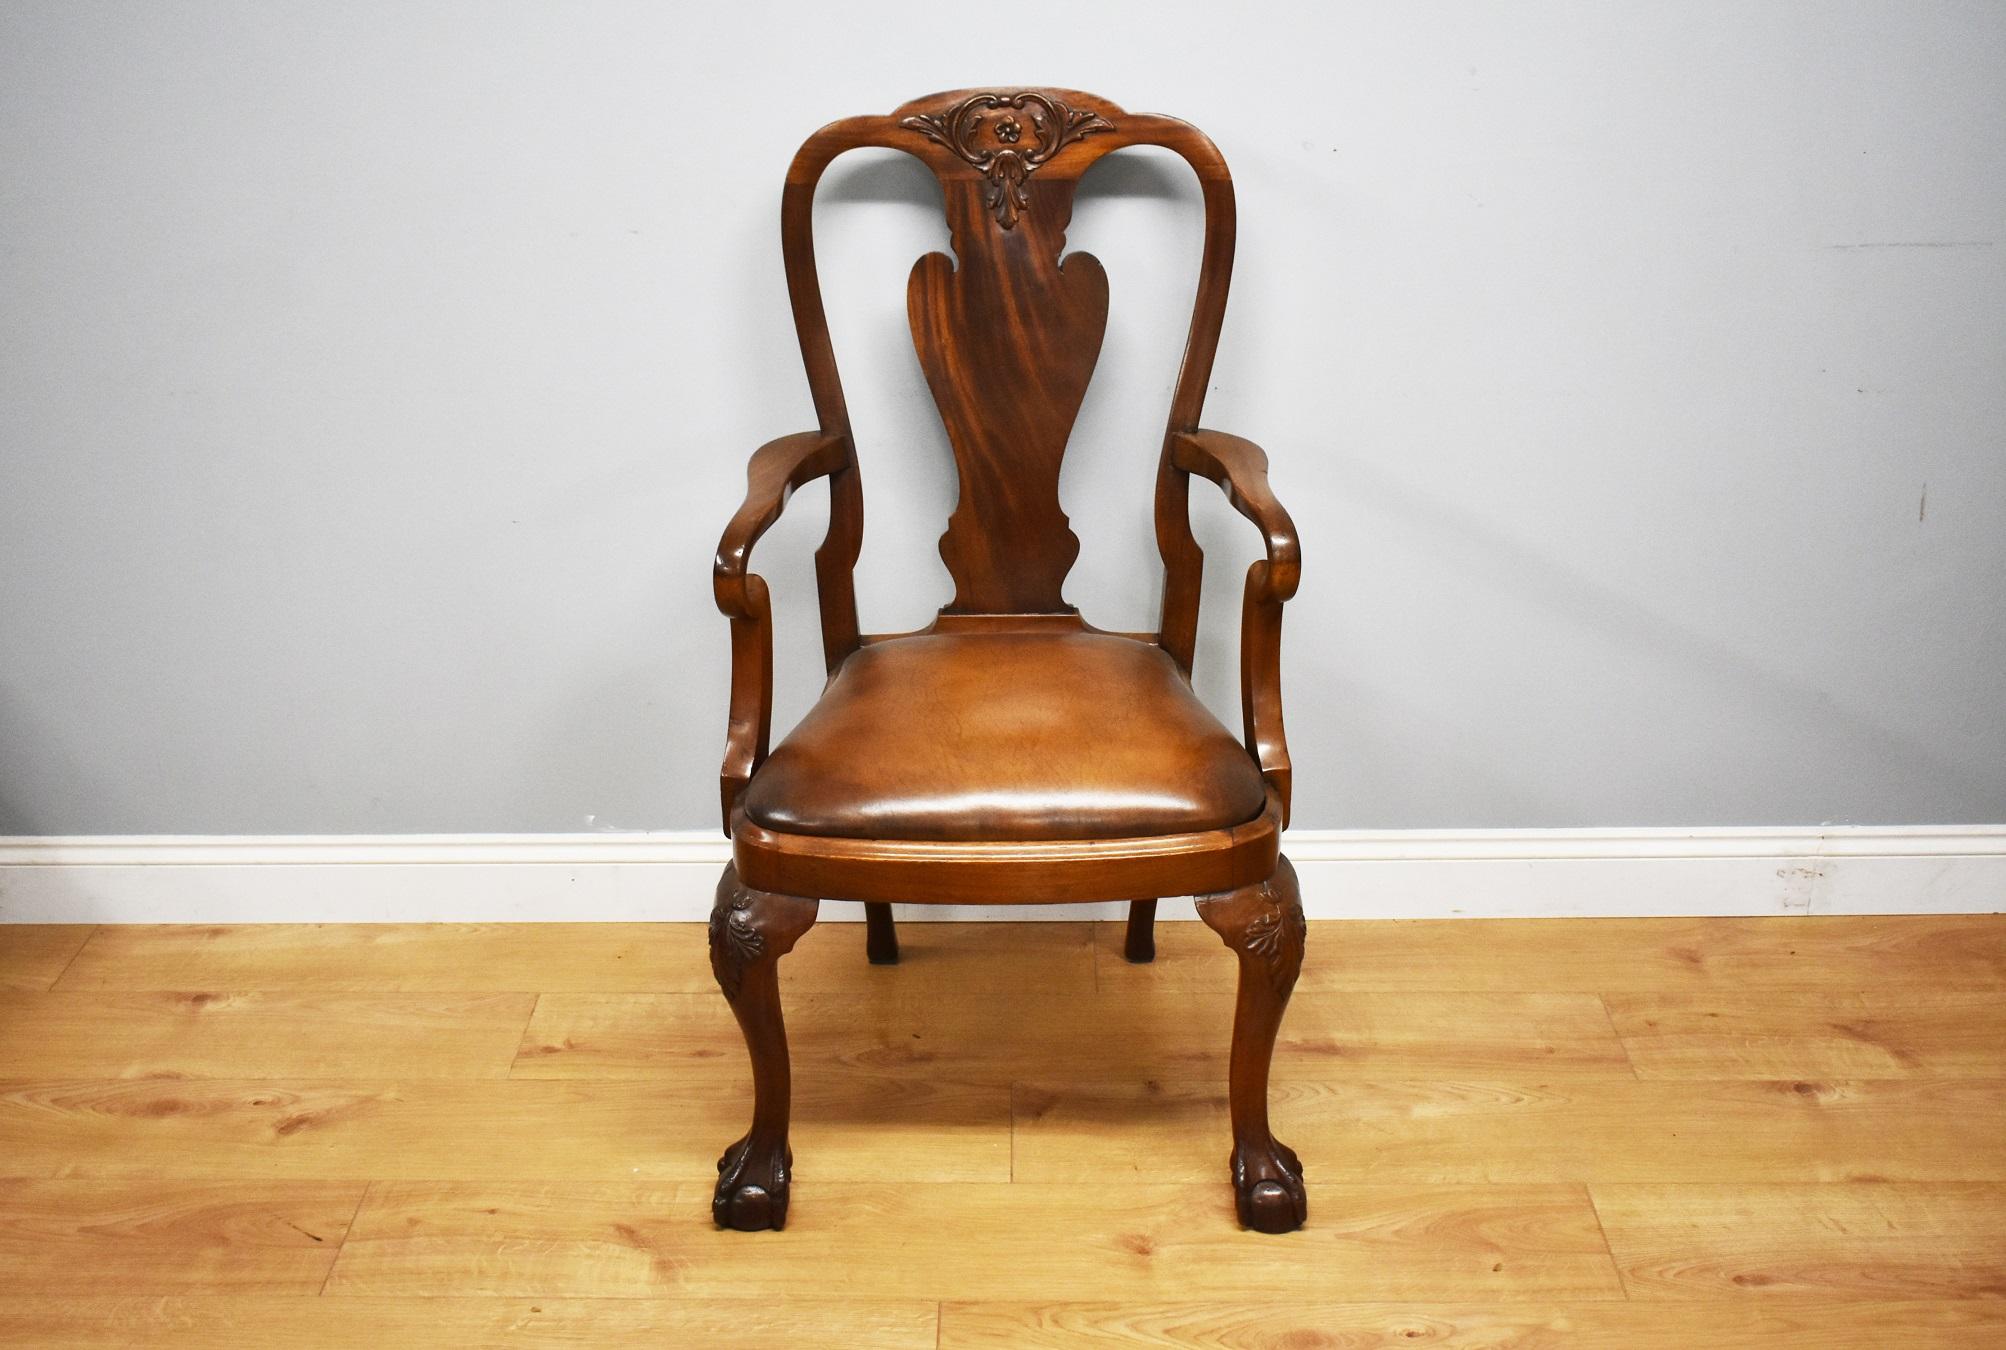 Dyed 20th Century Queen Anne Revival Solid Mahogany Armchair